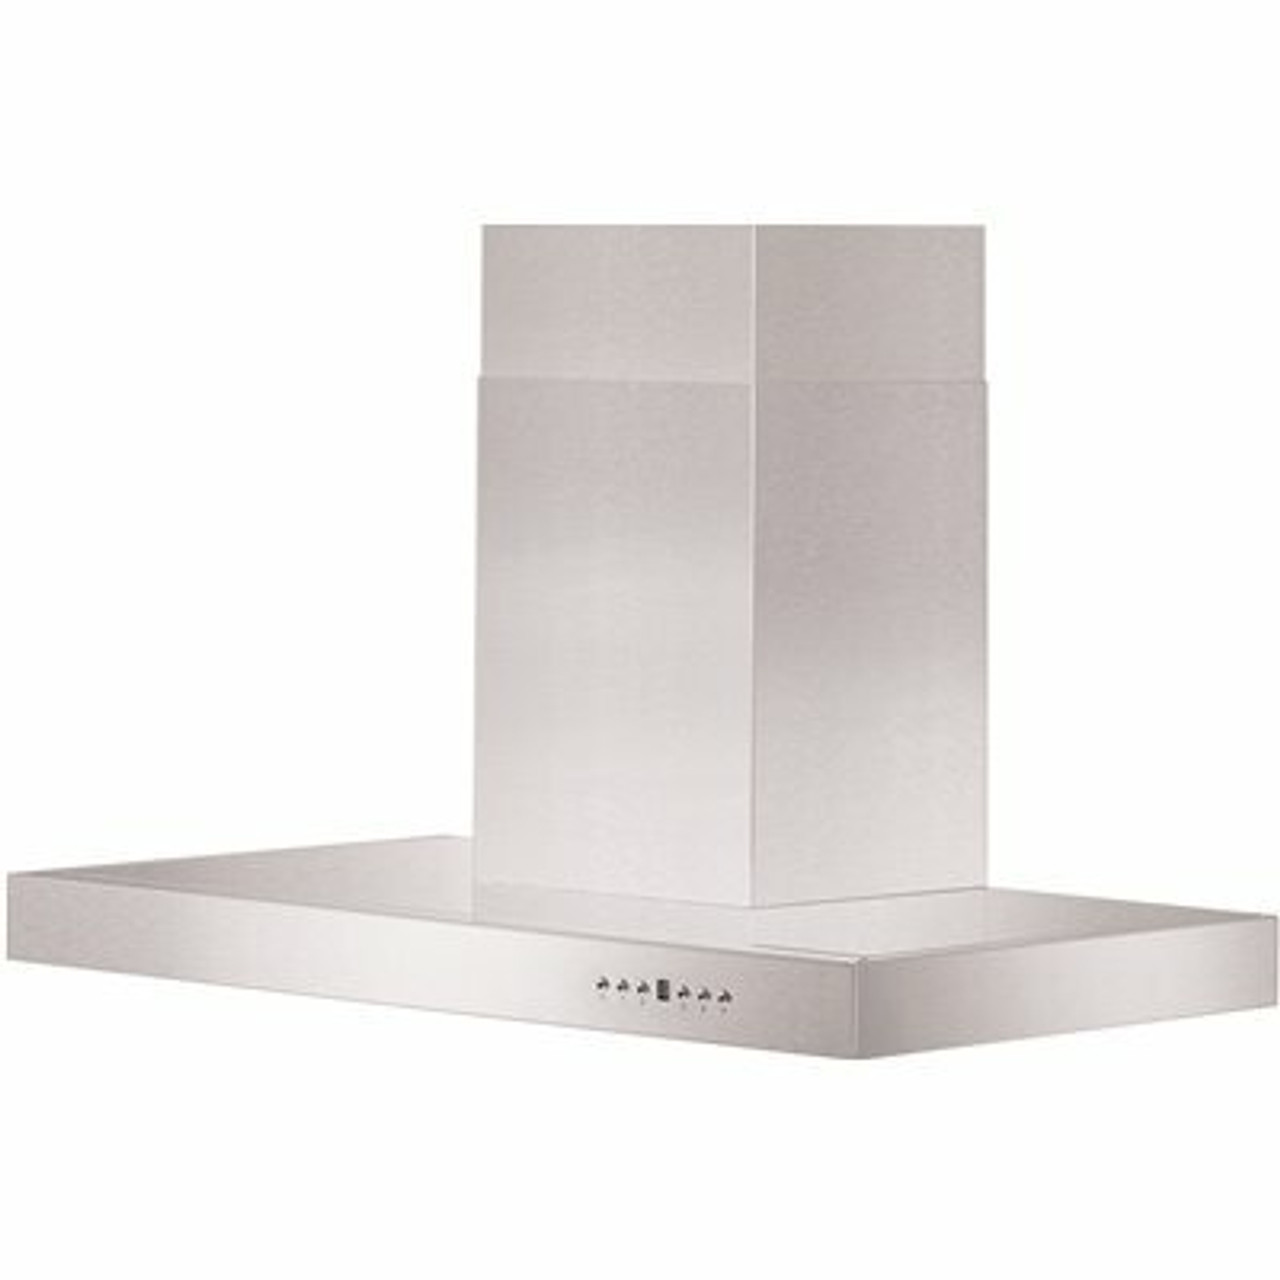 Zline Kitchen And Bath 36 In. Convertible Vent Wall Mount Range Hood In Stainless Steel - 206922070